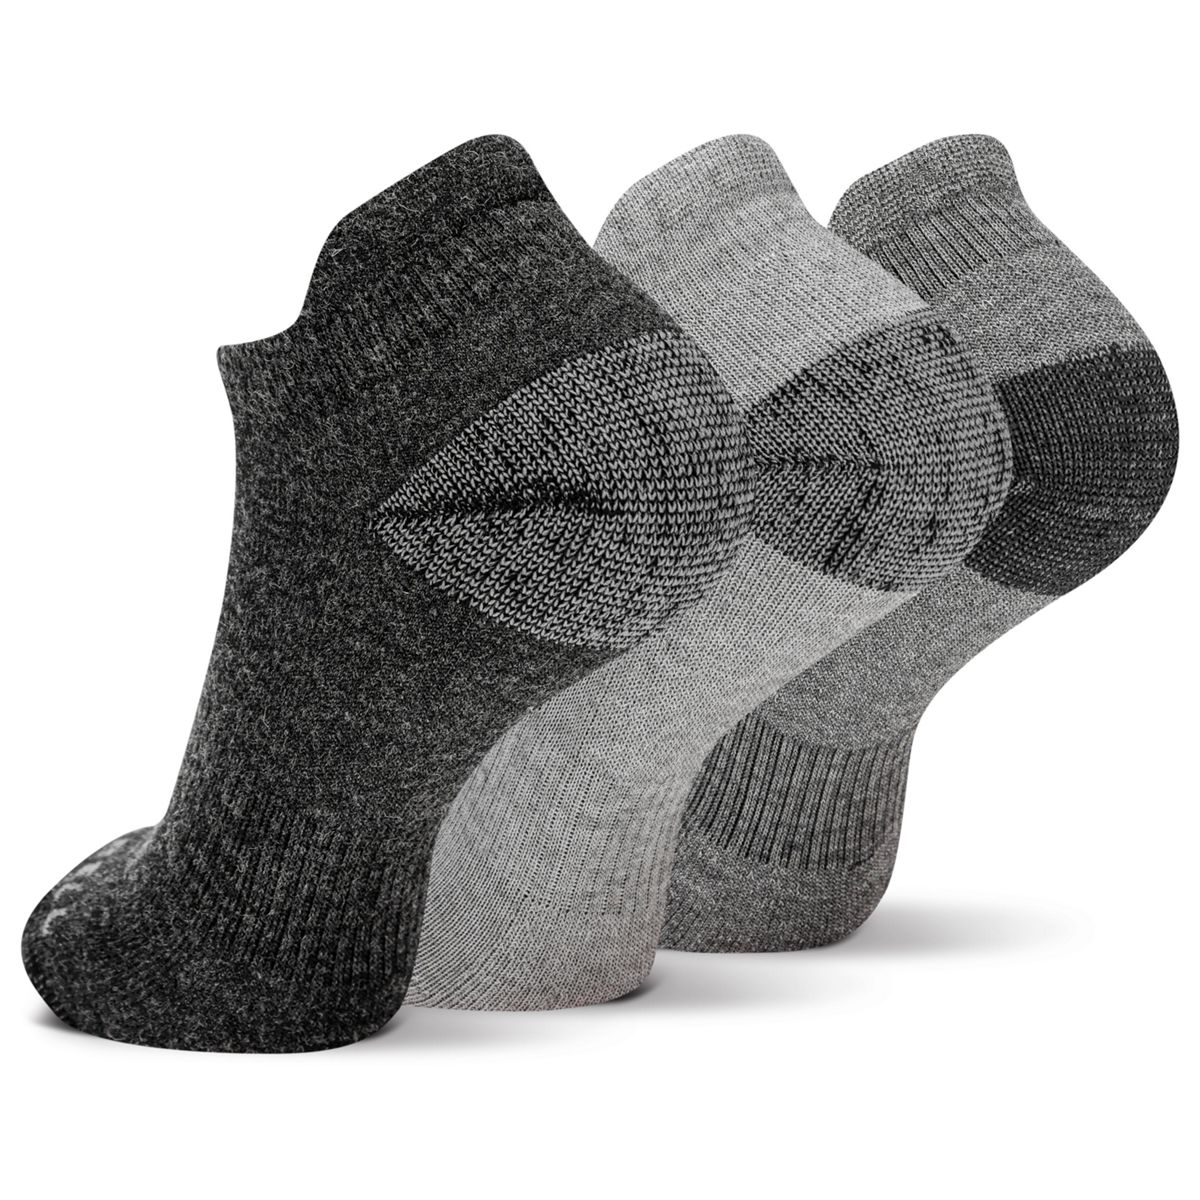 Wool Everday Tab Sock 3 Pack, Charcoal/Black Assorted, dynamic 2